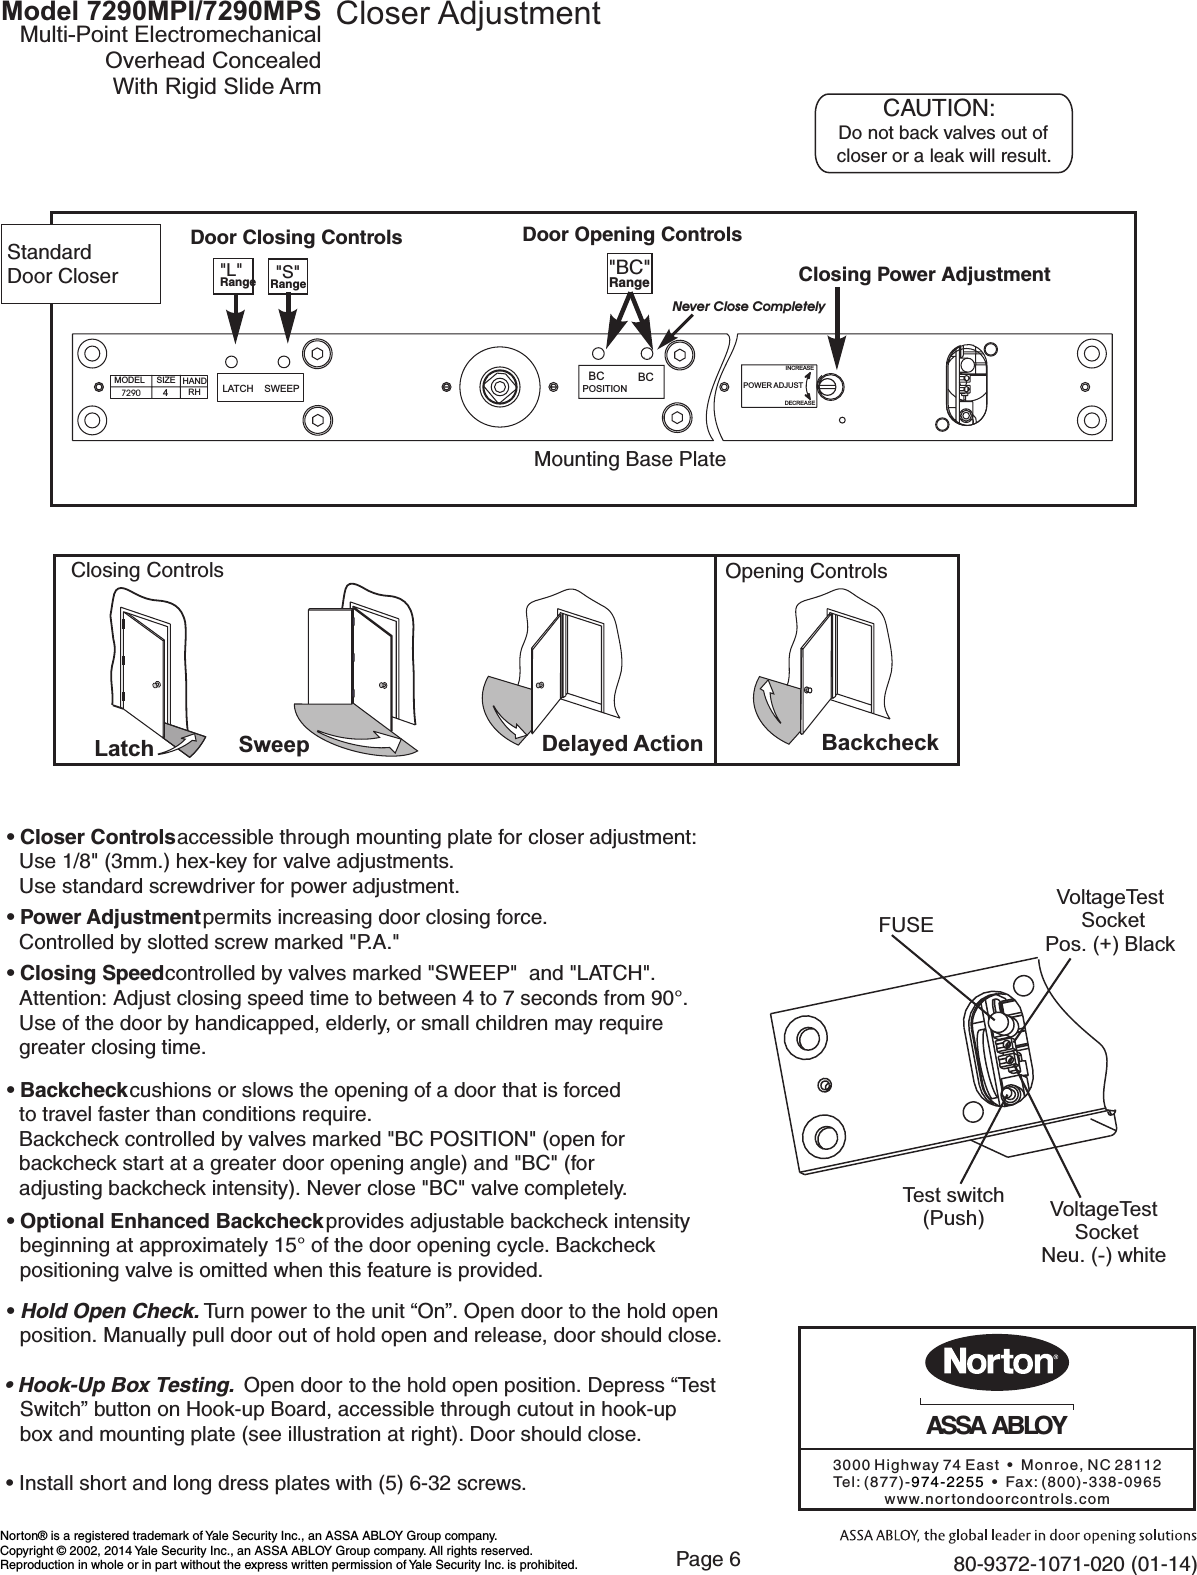 Page 6 of 6 - Norton  7290MPI, 7290 MPS Overhead Concealed Closer/Holder 80-9372-1071-020